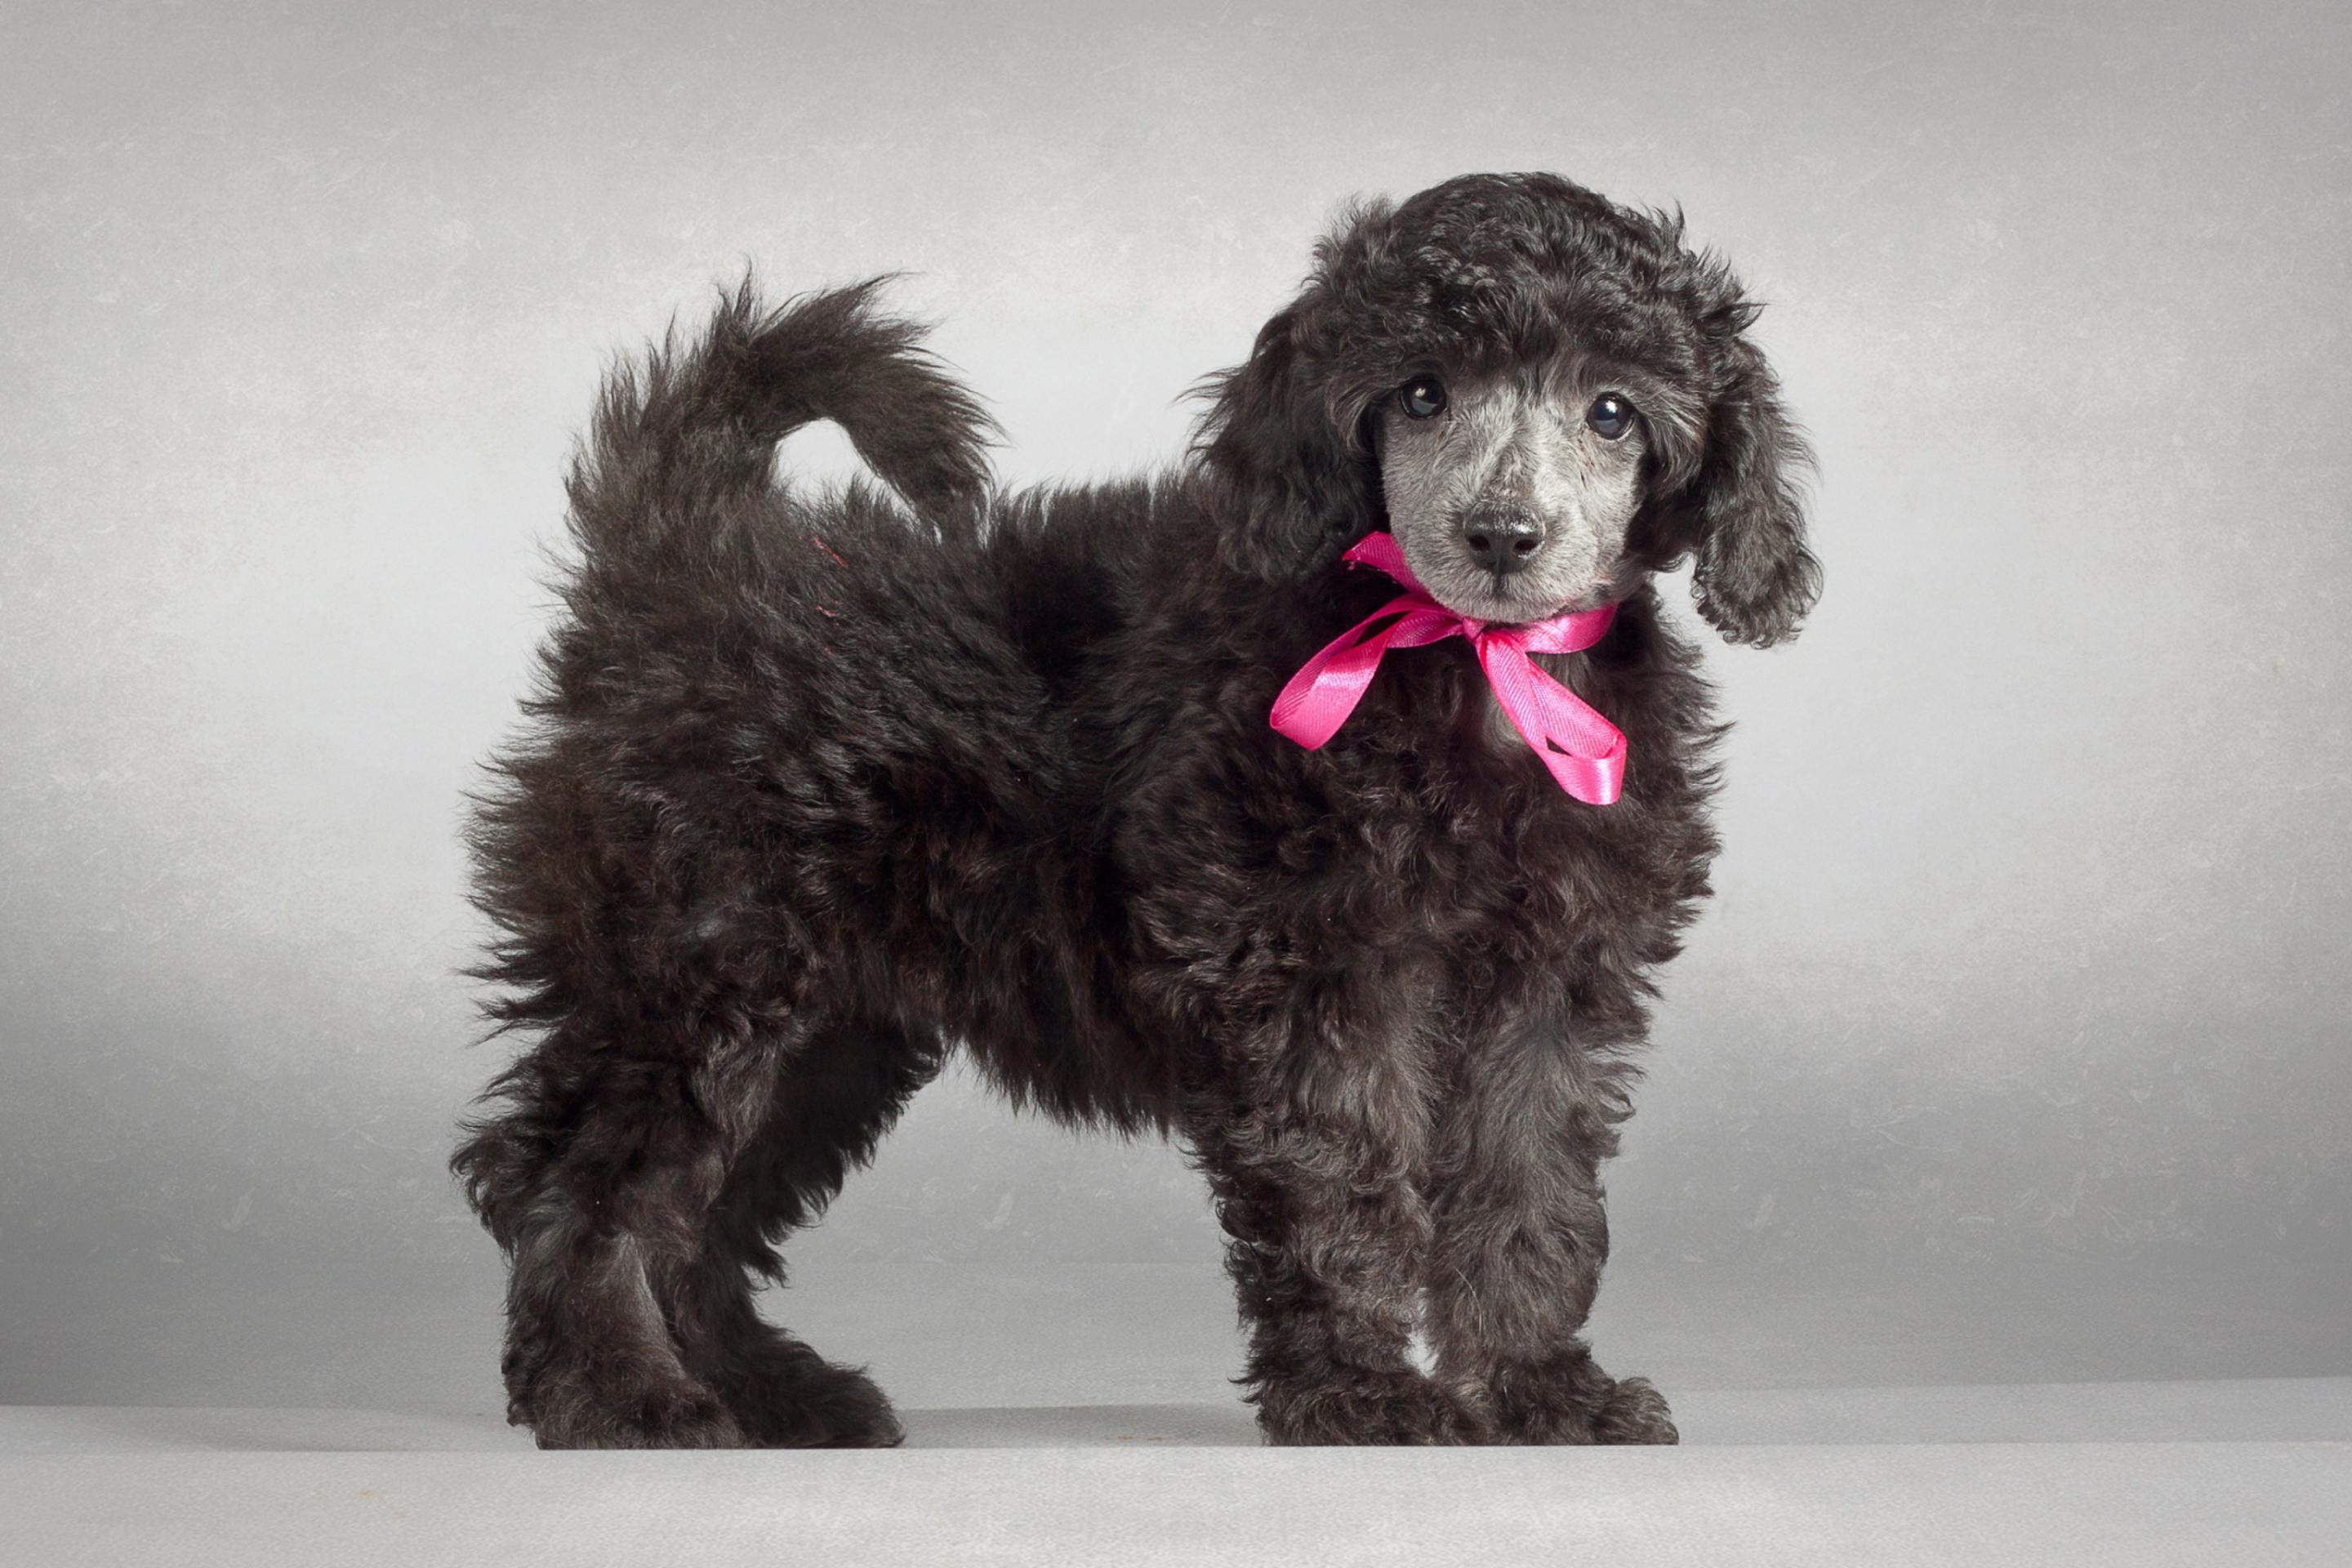 Funny Puppy With Pink Bow wallpaper 2880x1920